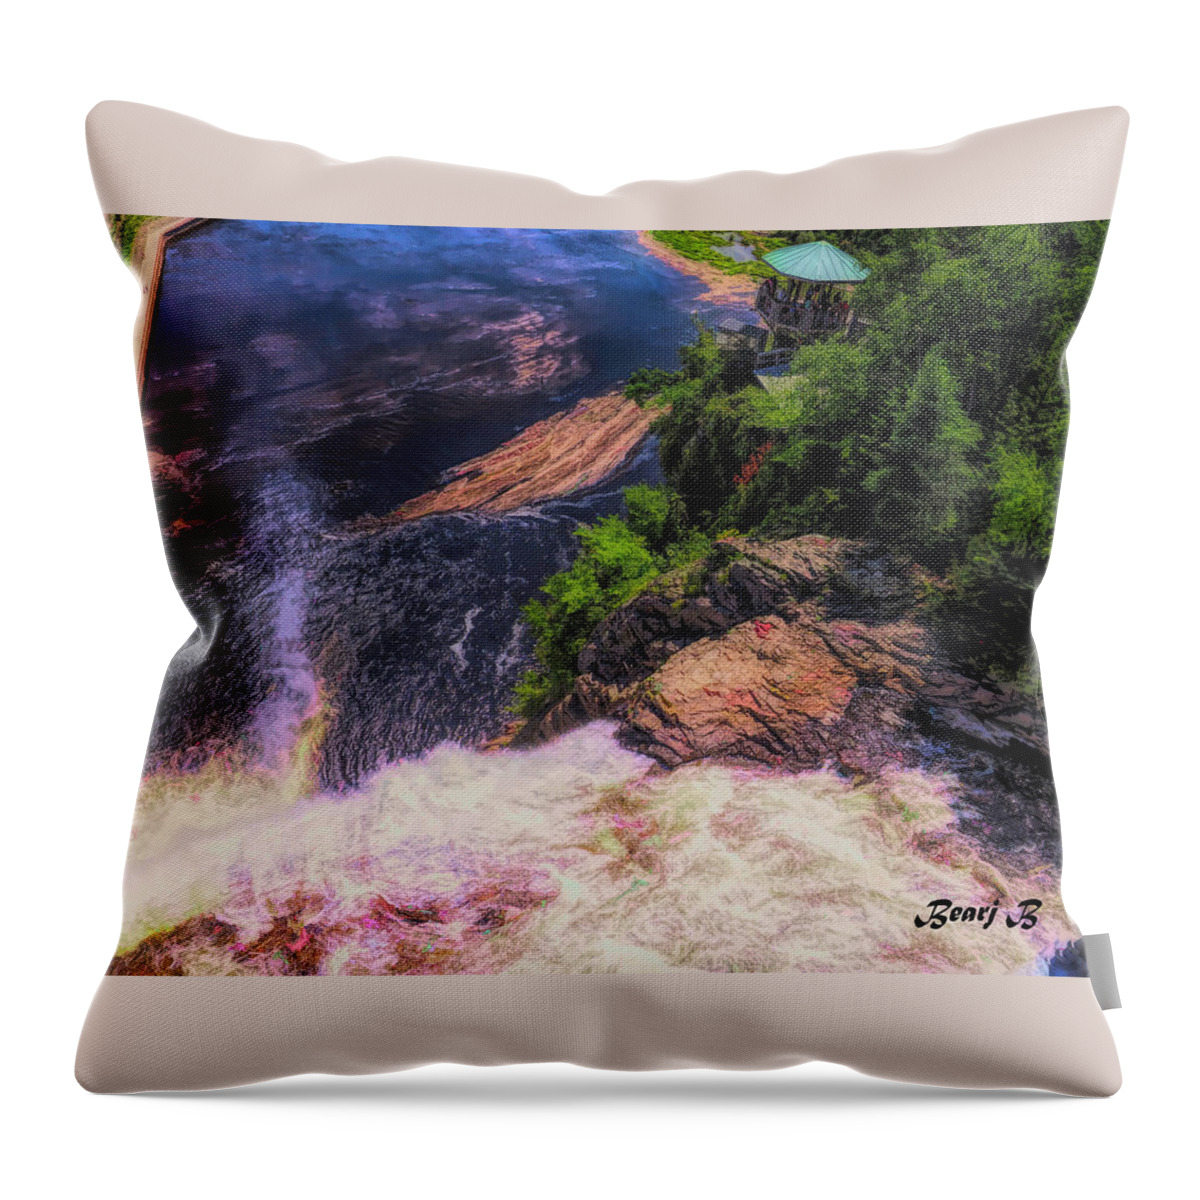 Montmorency Throw Pillow featuring the photograph Montmorency Falls by Bearj B Photo Art